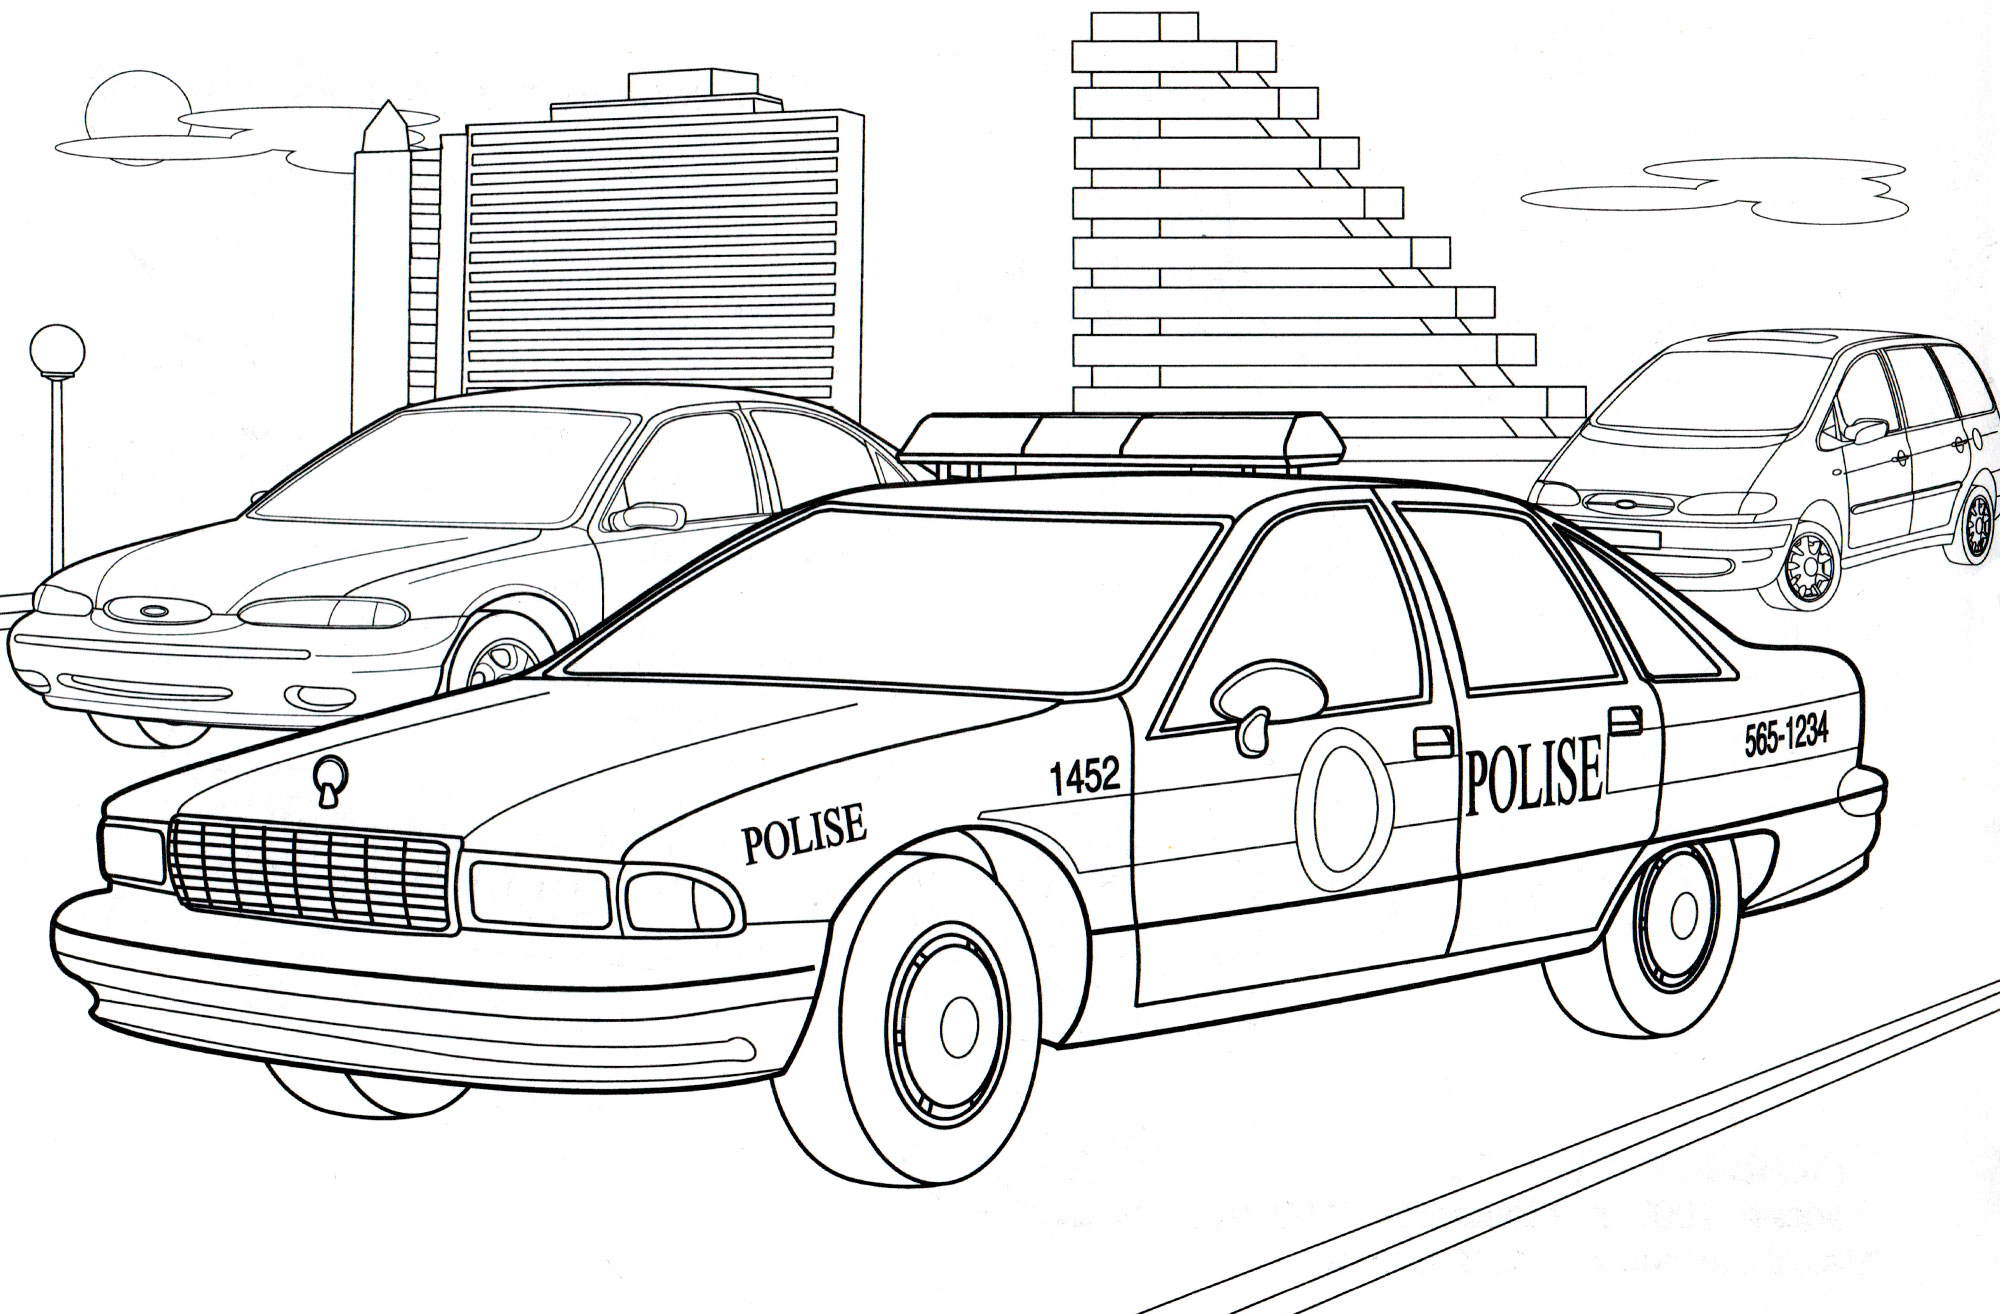 Coloring page Police car A police car patrols the city